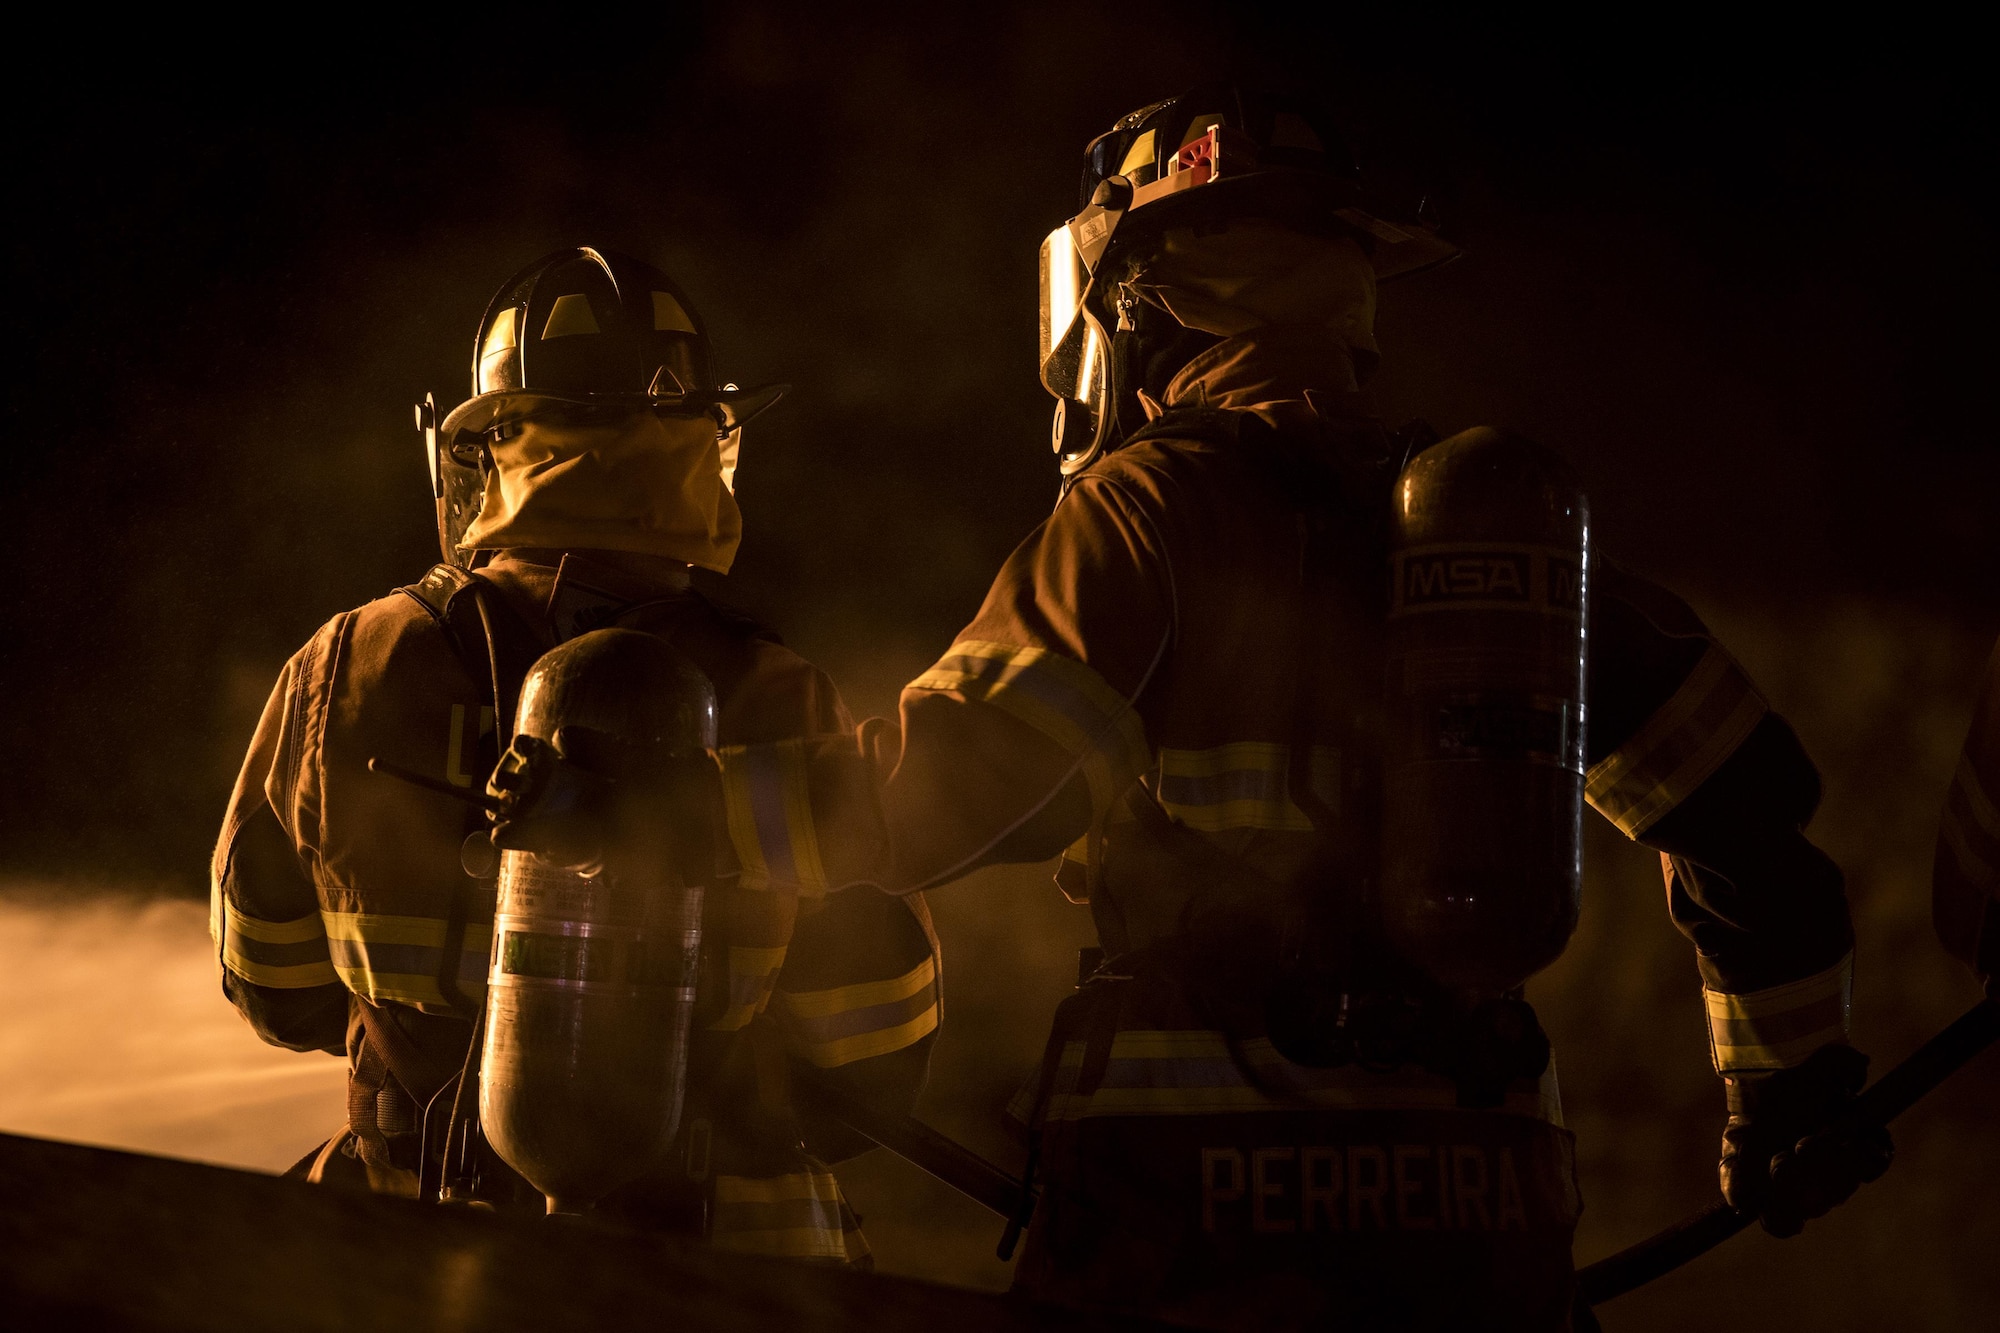 Matthew Perreira, right, 23d Civil Engineer Squadron firefighter, backs up a fellow firefighter during nighttime, live-fire training, Jan. 10, 2017, at Moody Air Force Base, Ga. This training is an annual requirement for Moody firefighters and is just one of the ways they stay ready to protect people, property and the environment from fires and disasters. (U.S. Air Force photo by Staff Sgt. Ryan Callaghan)
